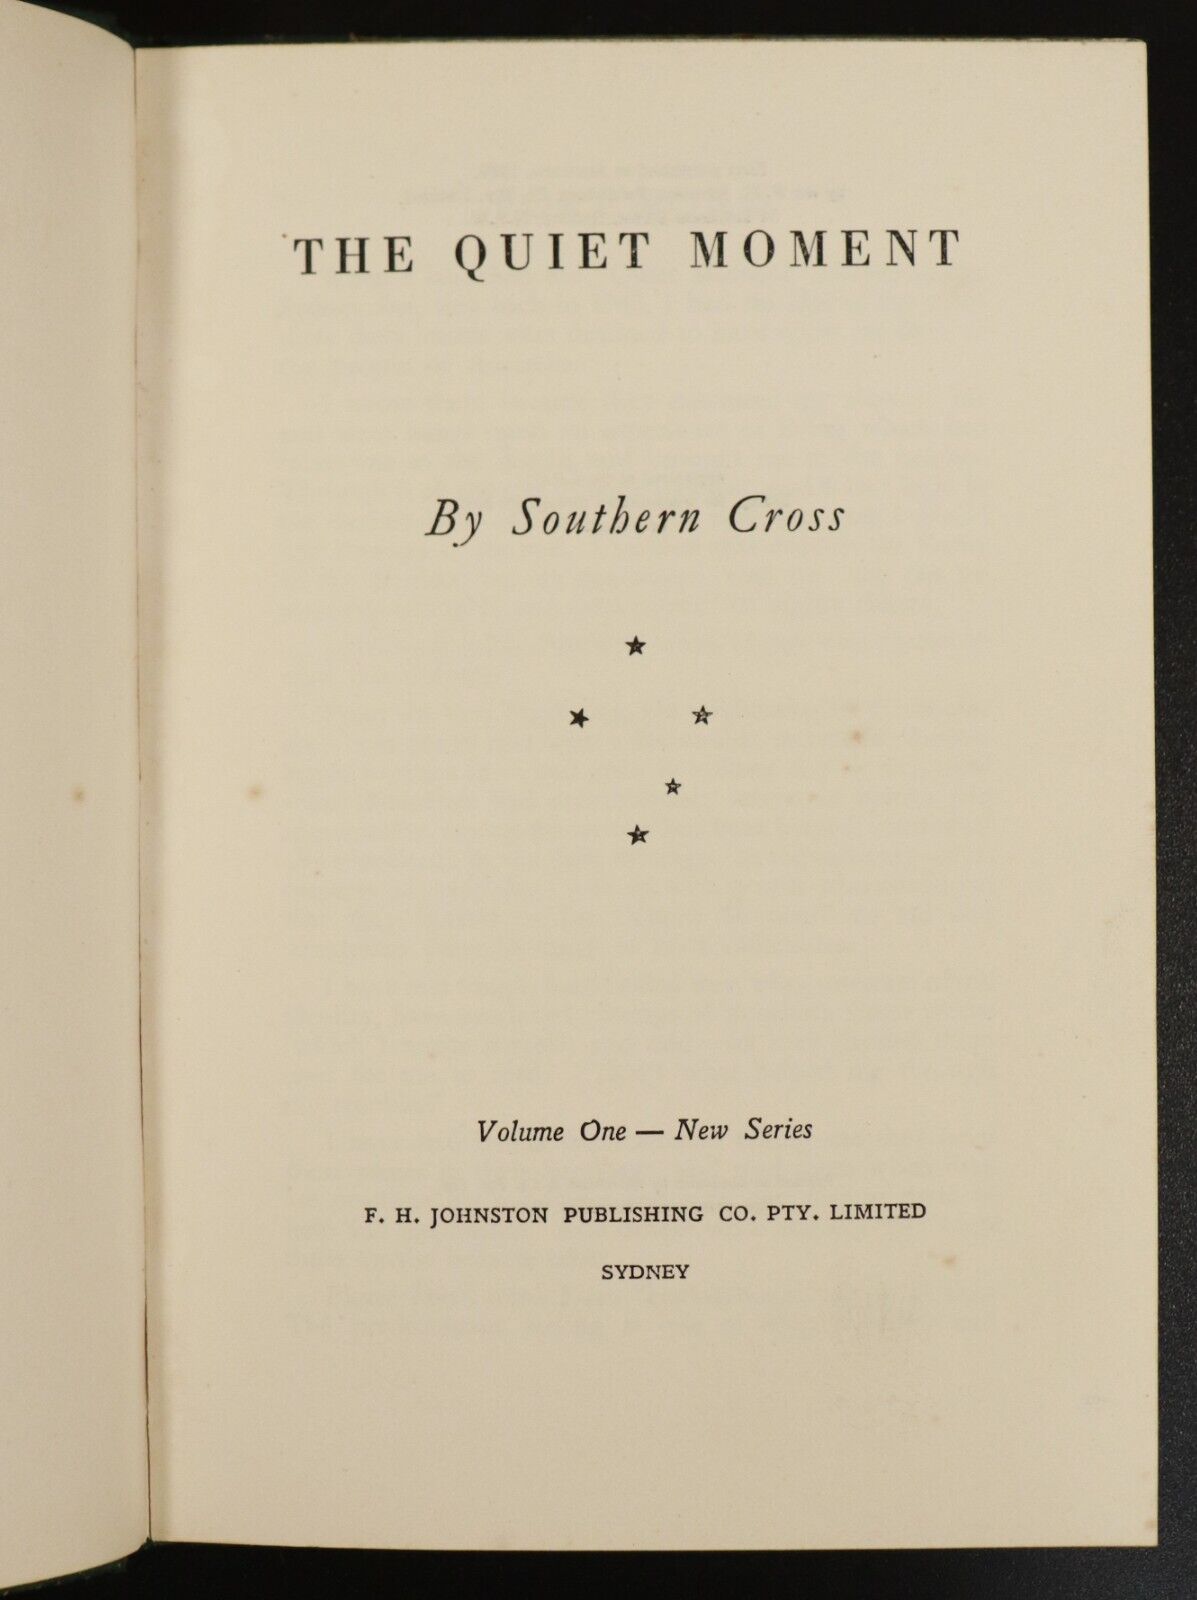 1949 The Quiet Moment by Southern Cross - Antique Australian Literature Book - 0